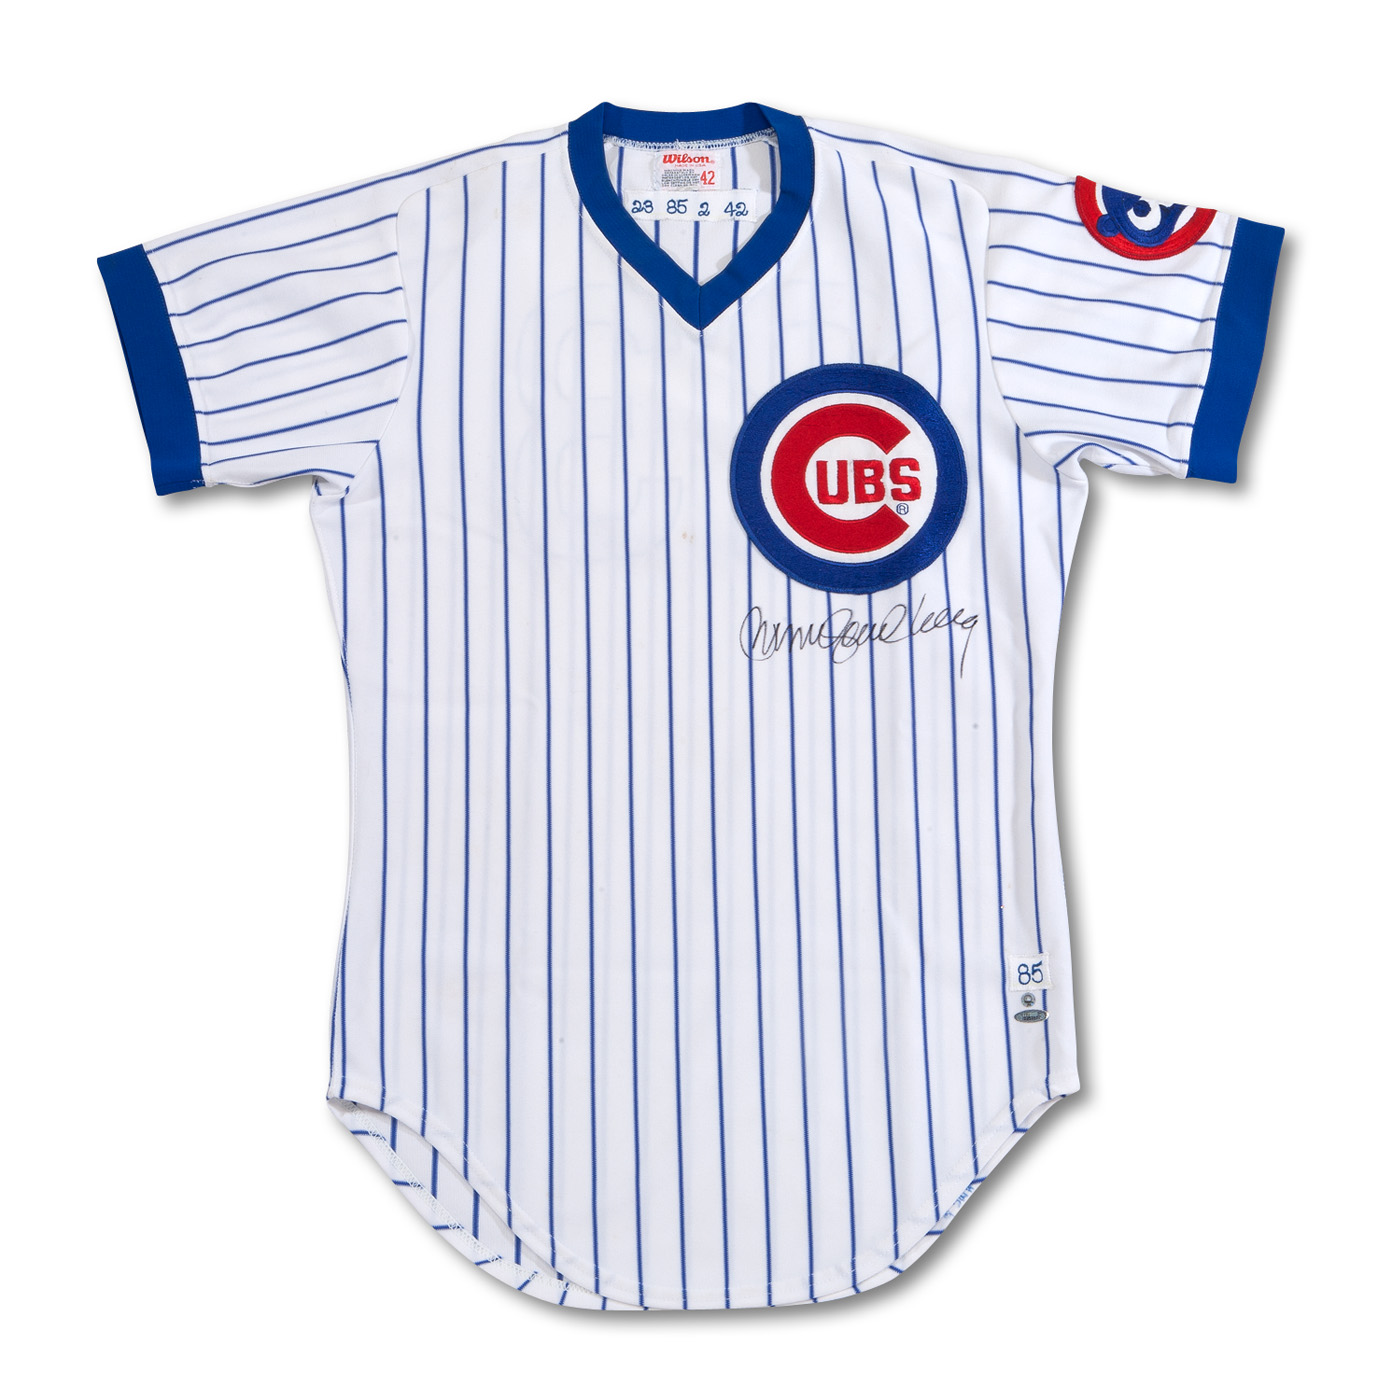  Ryne Sandberg Autographed Gray Cubs Jersey - Beautifully Matted  and Framed - Hand Signed By Ryne Sandberg and Certified Authentic by JSA -  Includes Certificate of Authenticity : Sports & Outdoors